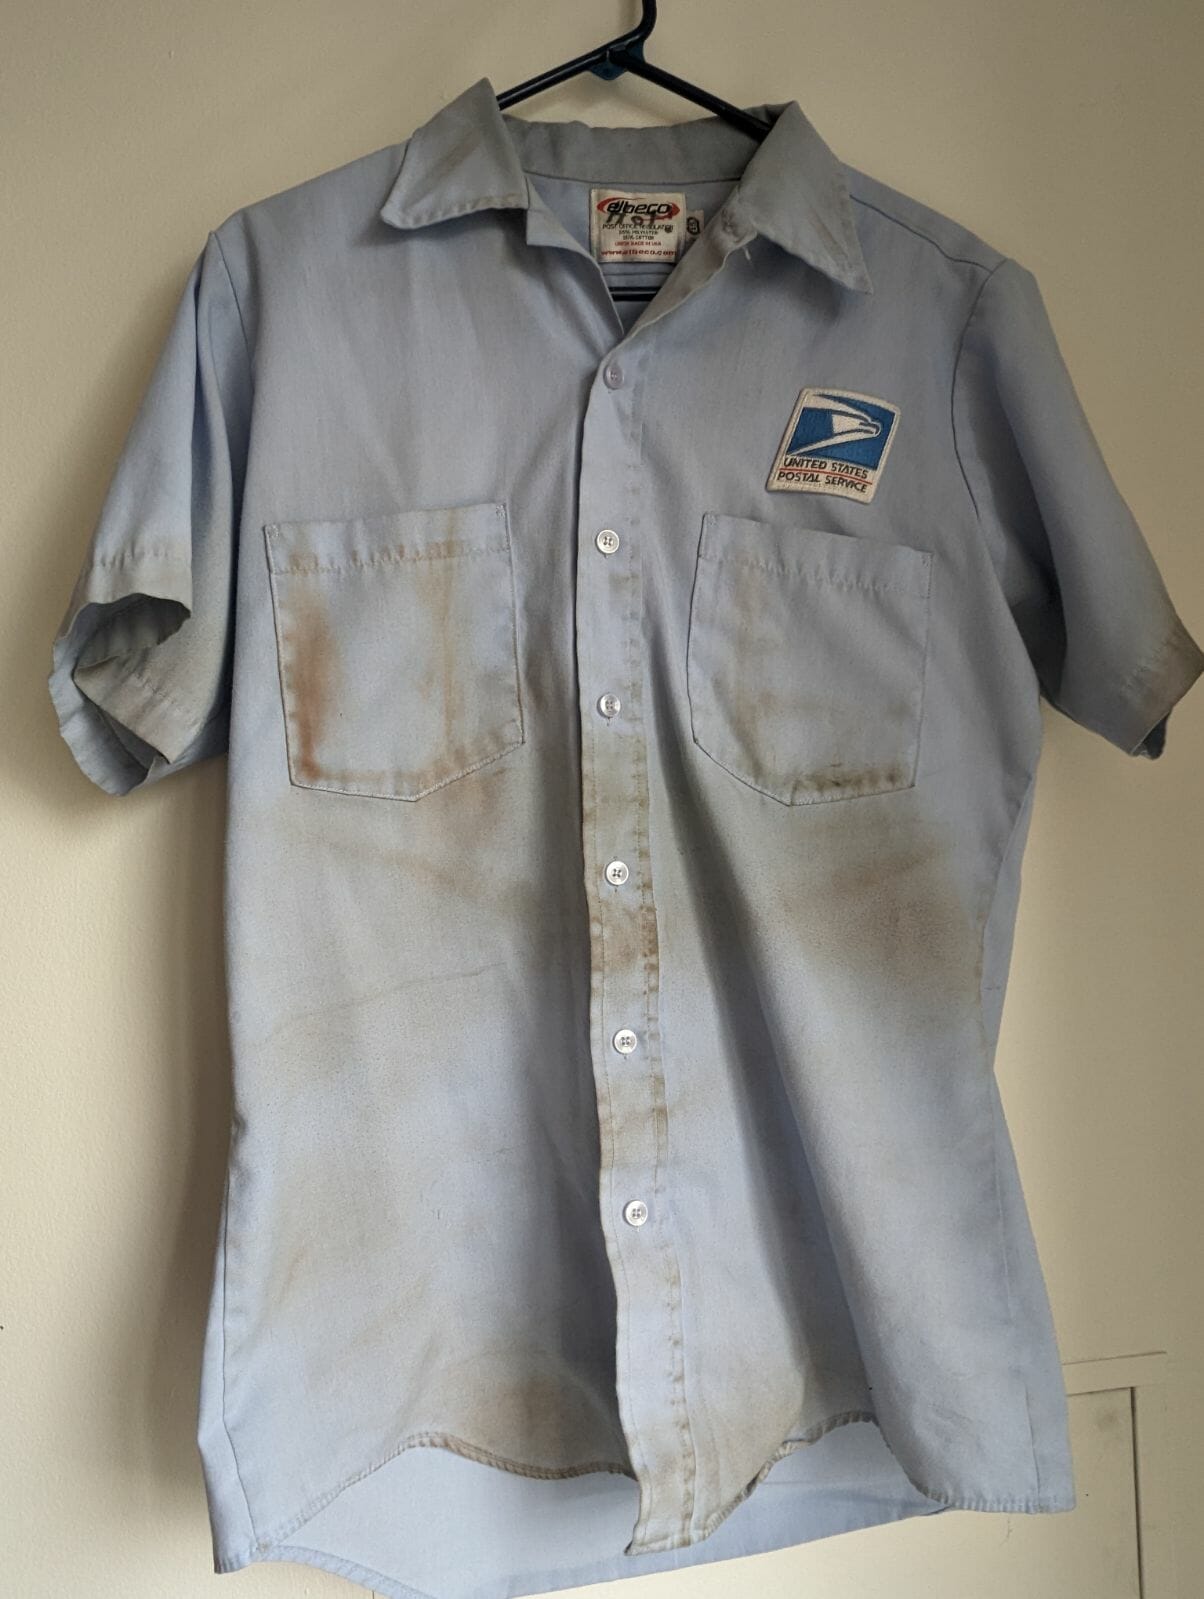 Dirty usps shirt before laundry